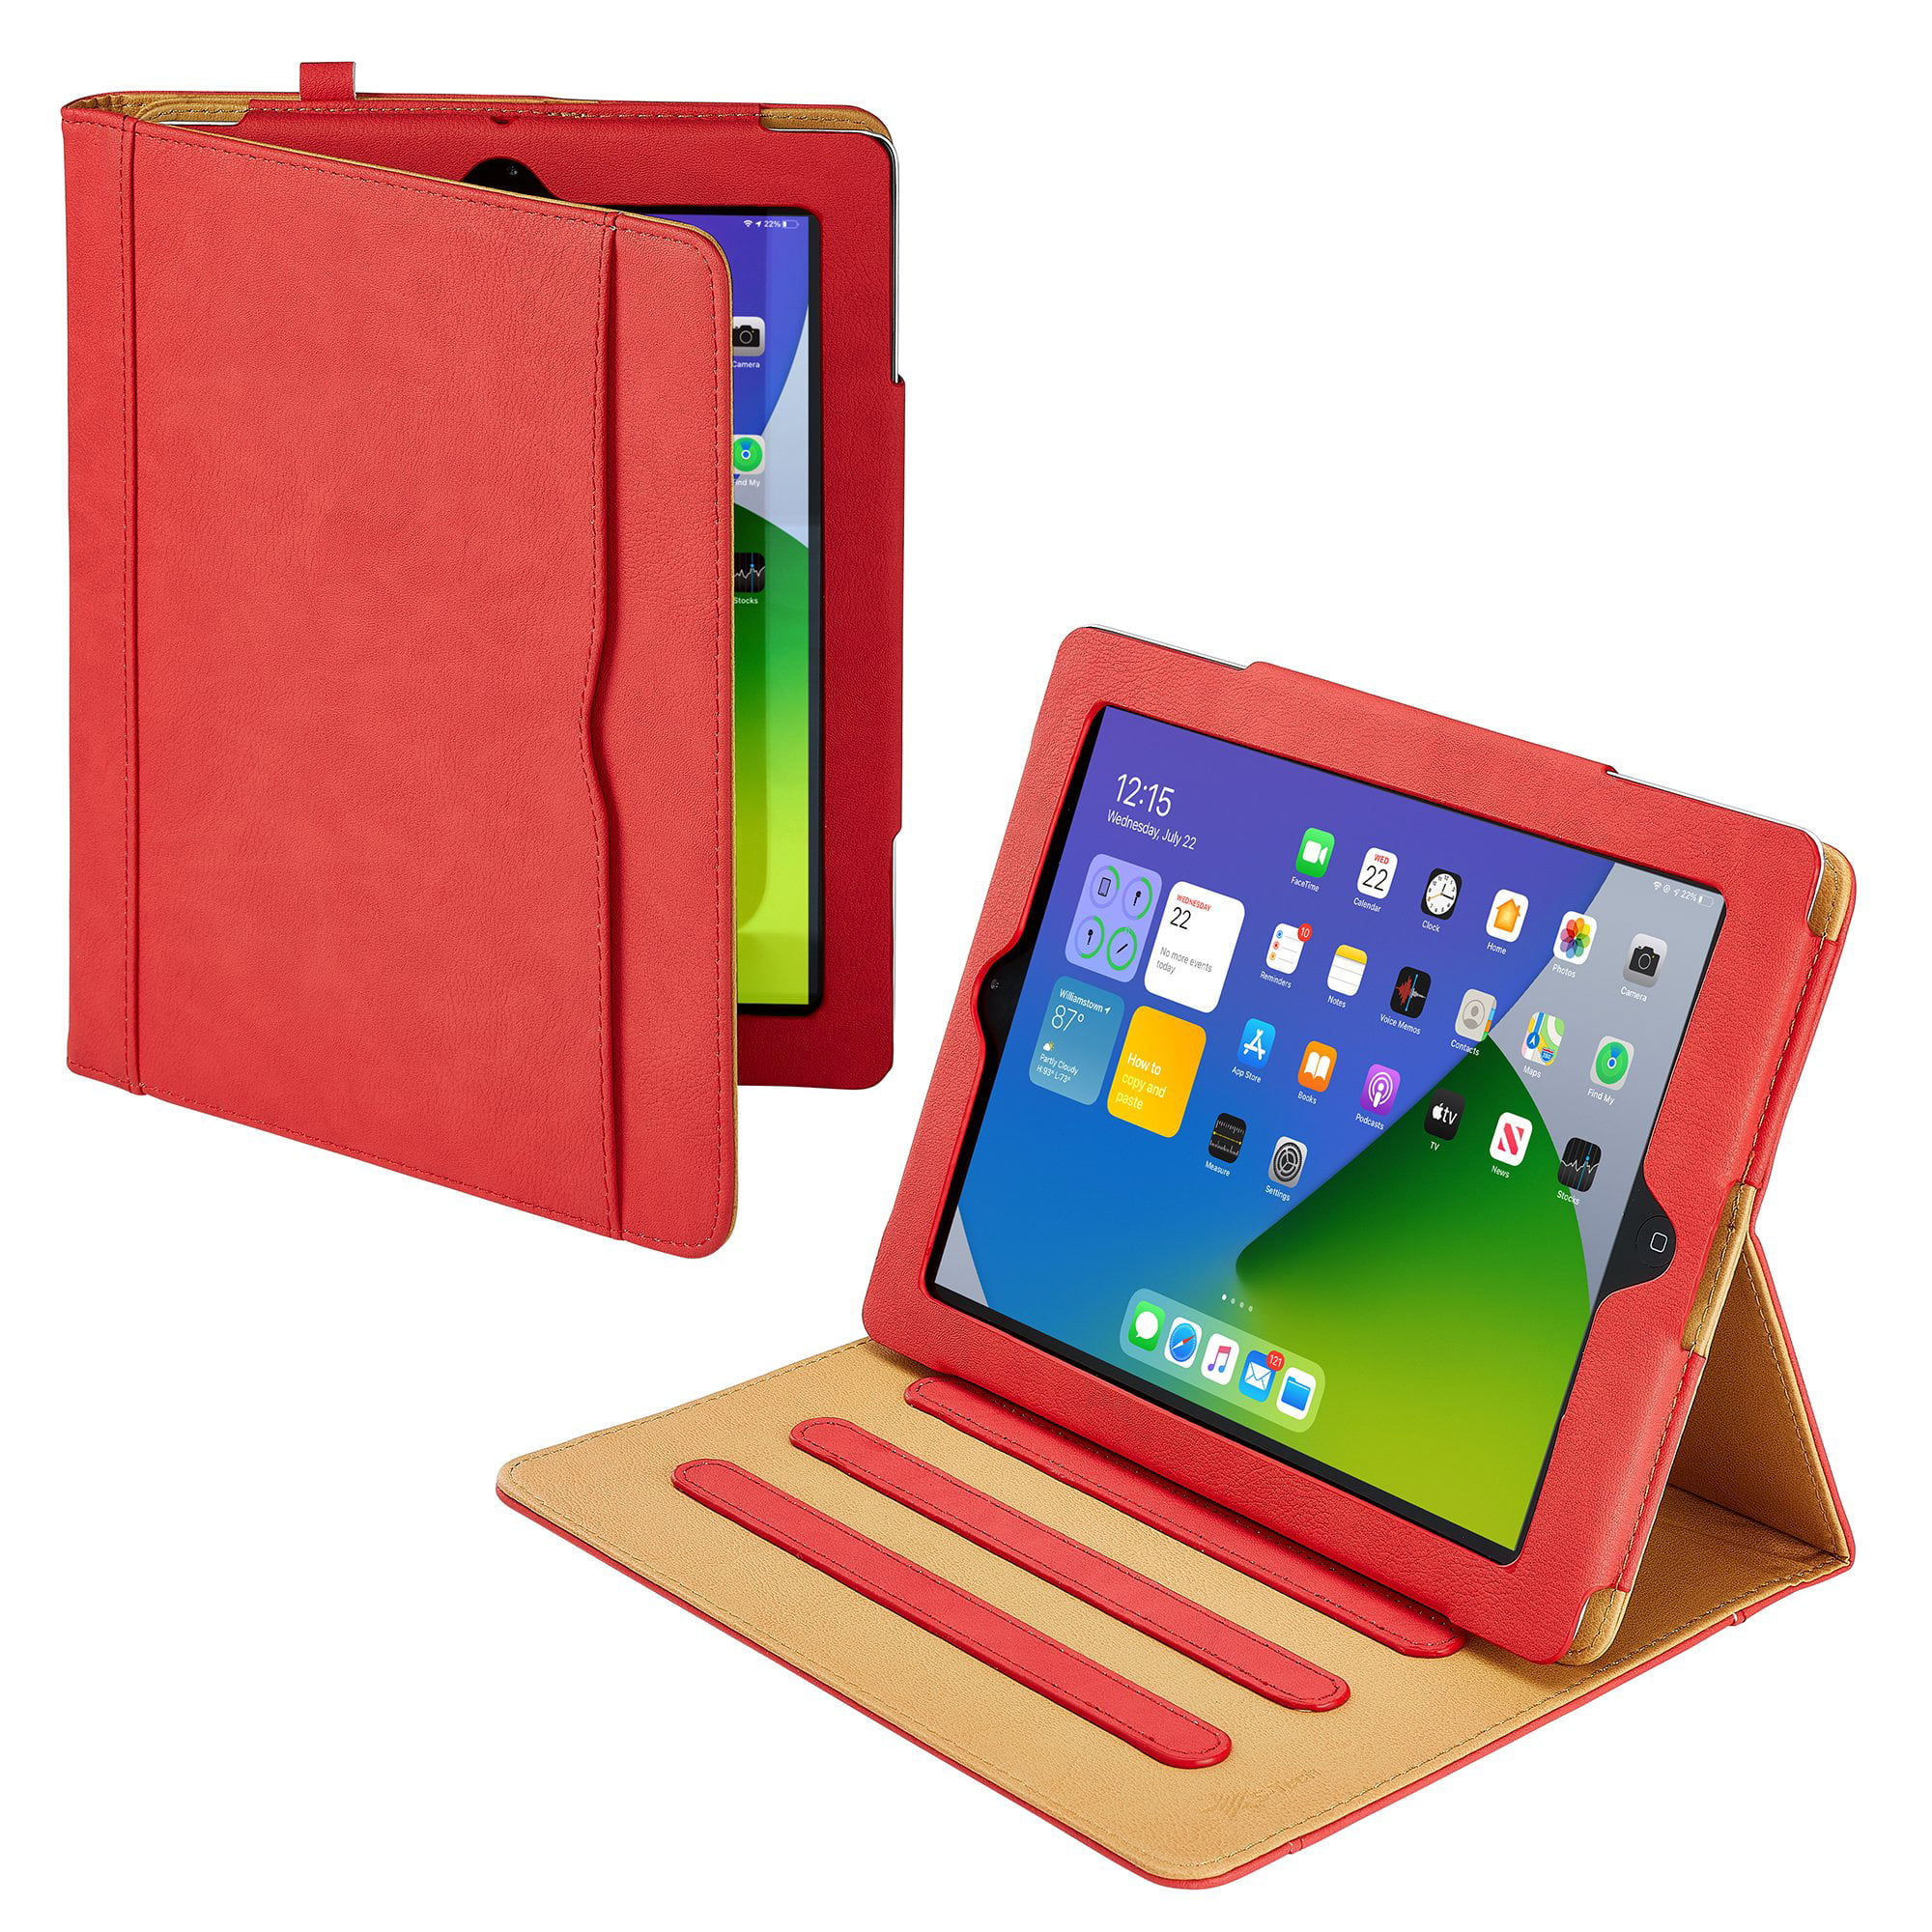 Apple iPad 6th Generation 9.7" Smart Cover Wallet Folio Stand Case